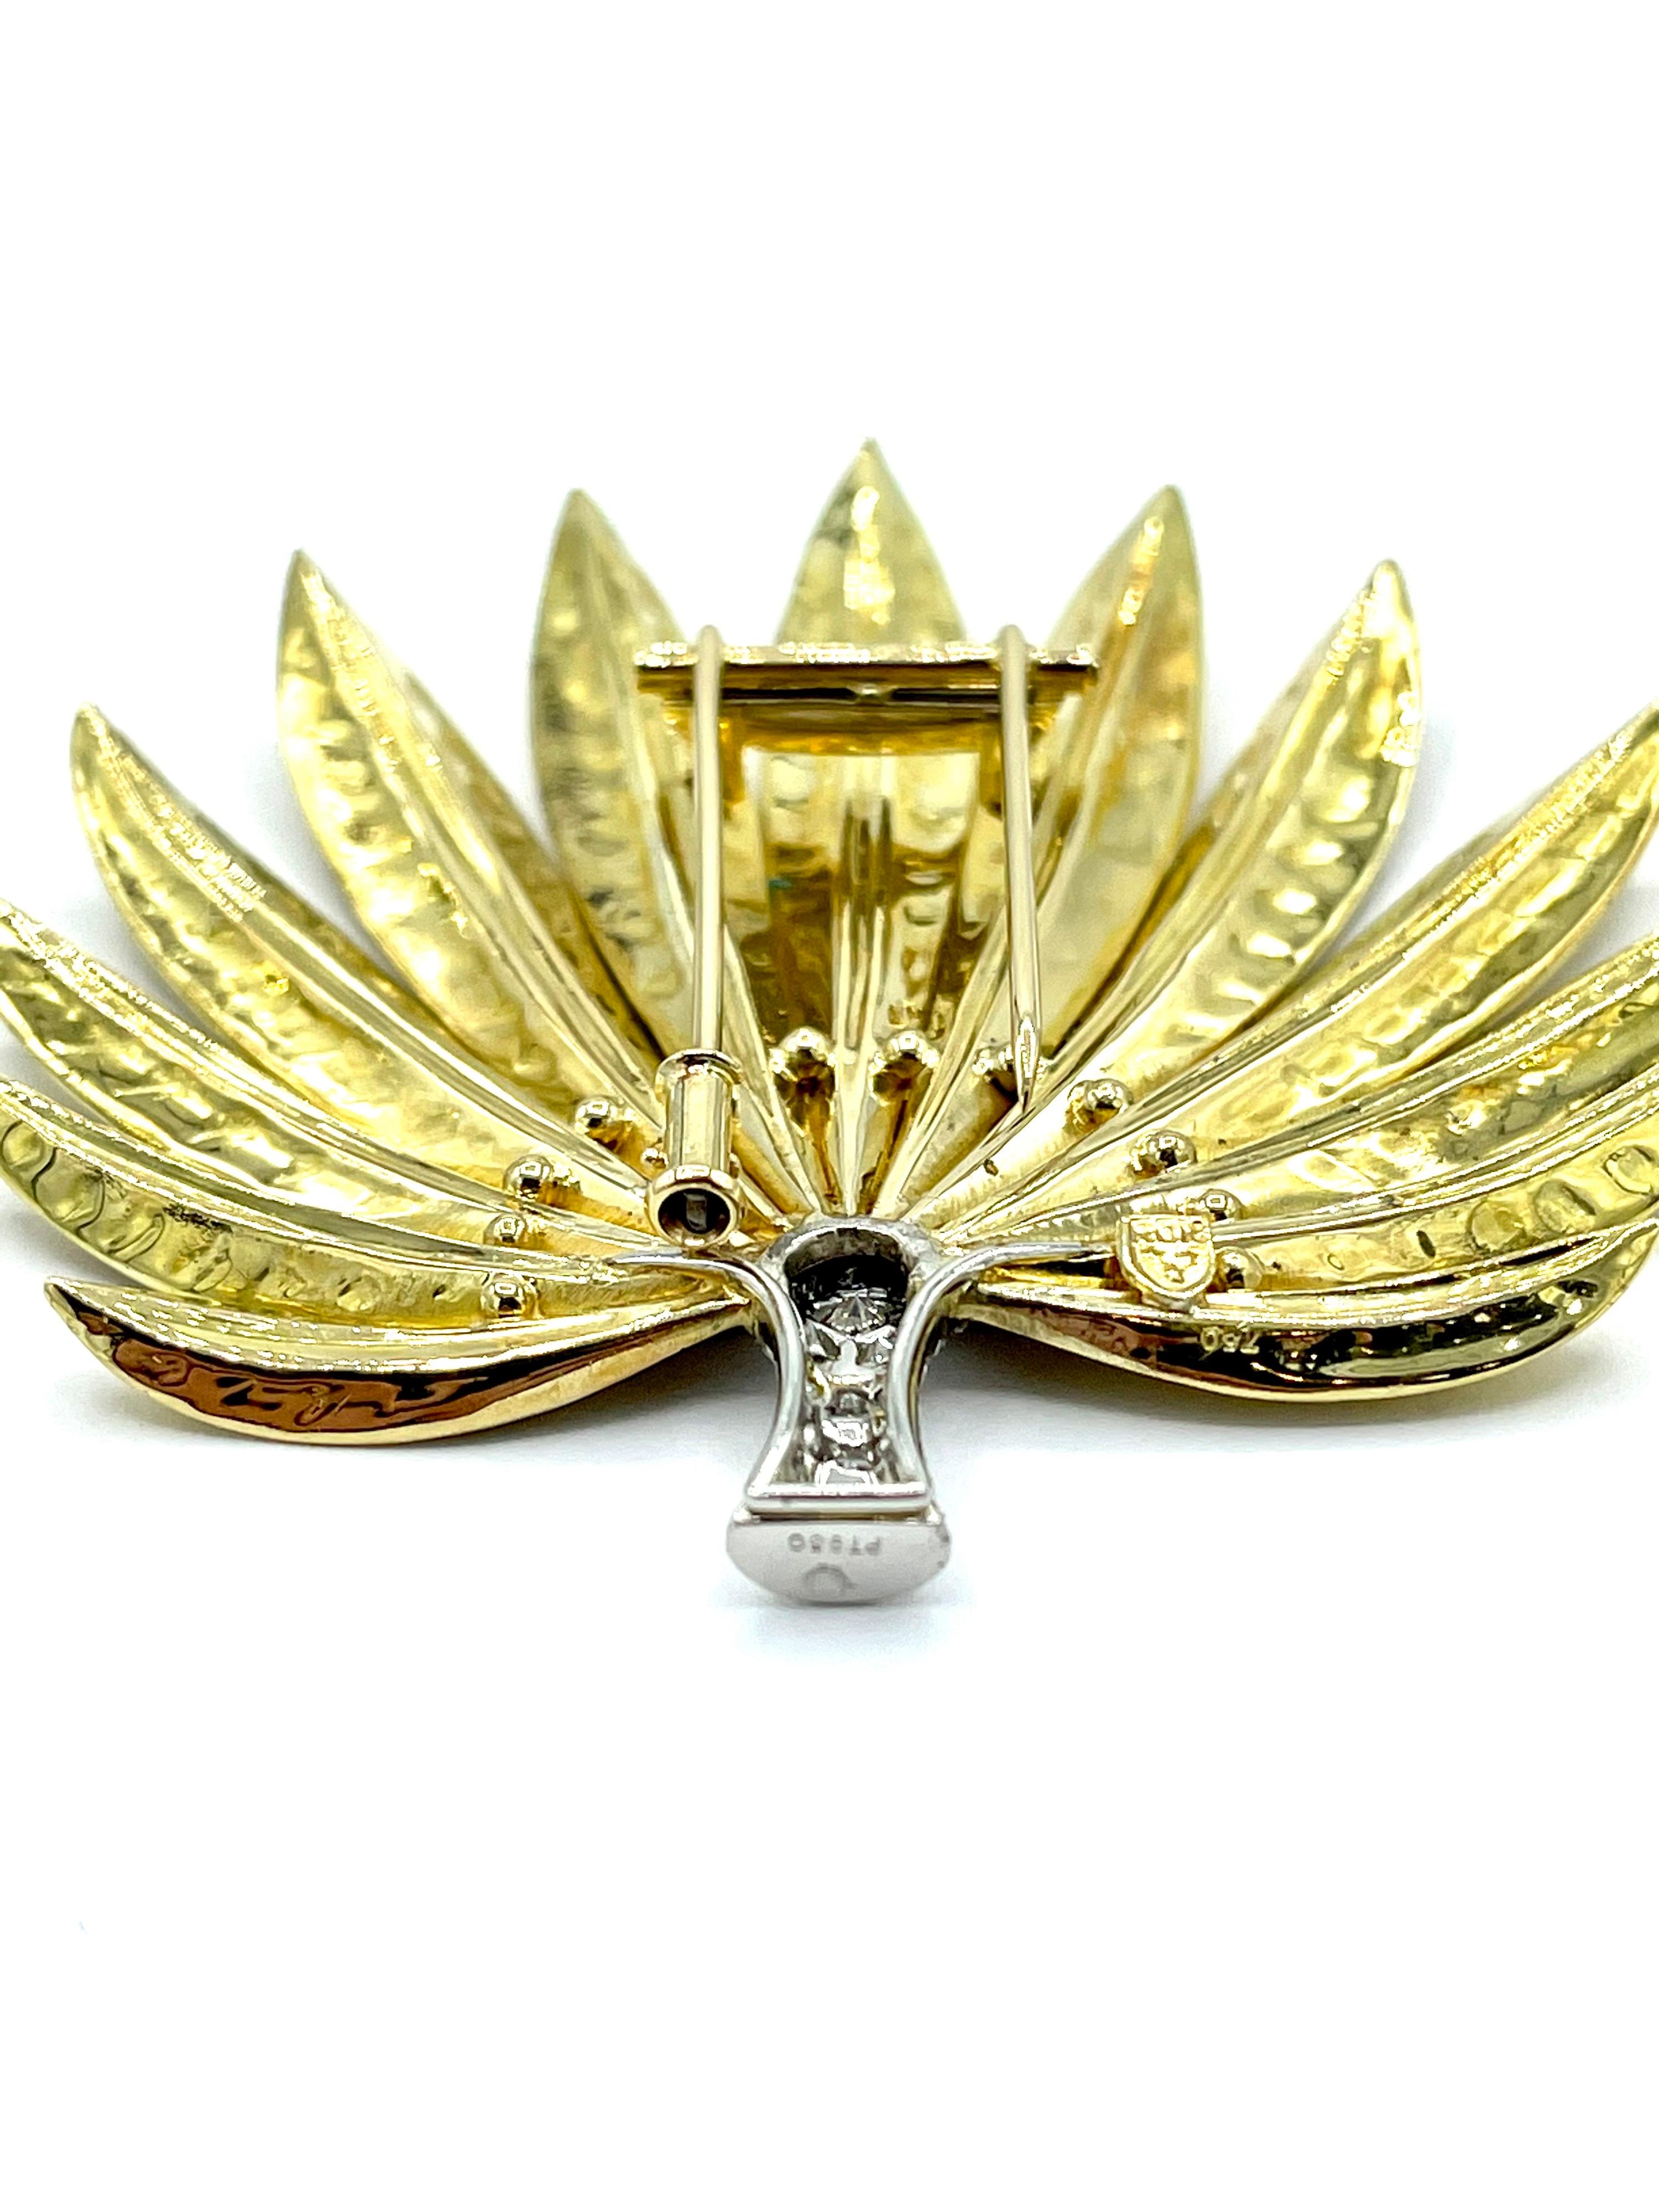 0.90 Carat Round Brilliant Diamond and 18K Gold & Platinum Feathered Fan Brooch For Sale 4